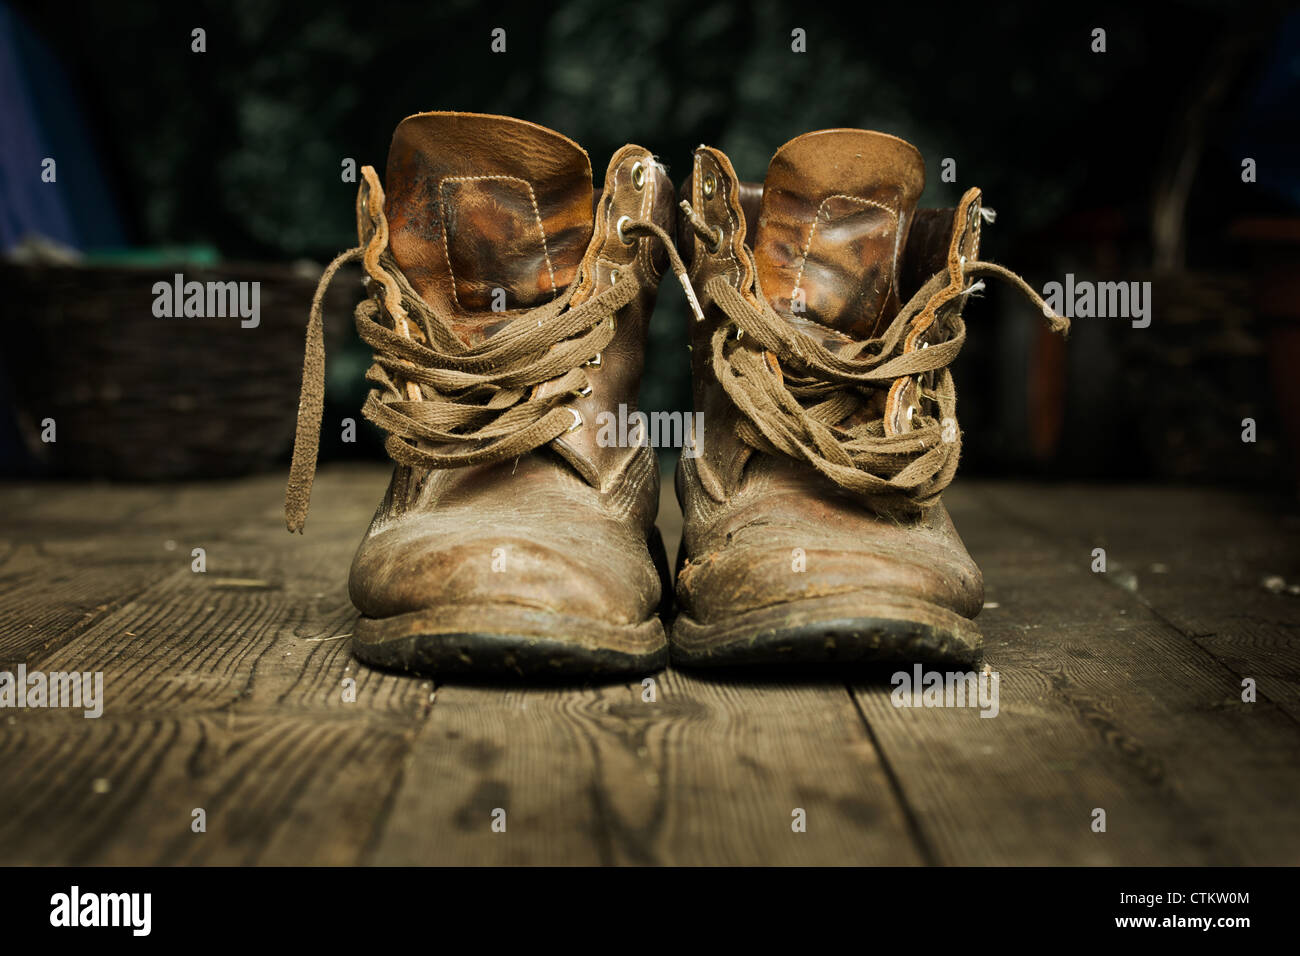 Pair of old worn boots on wooden floor boards Stock Photo